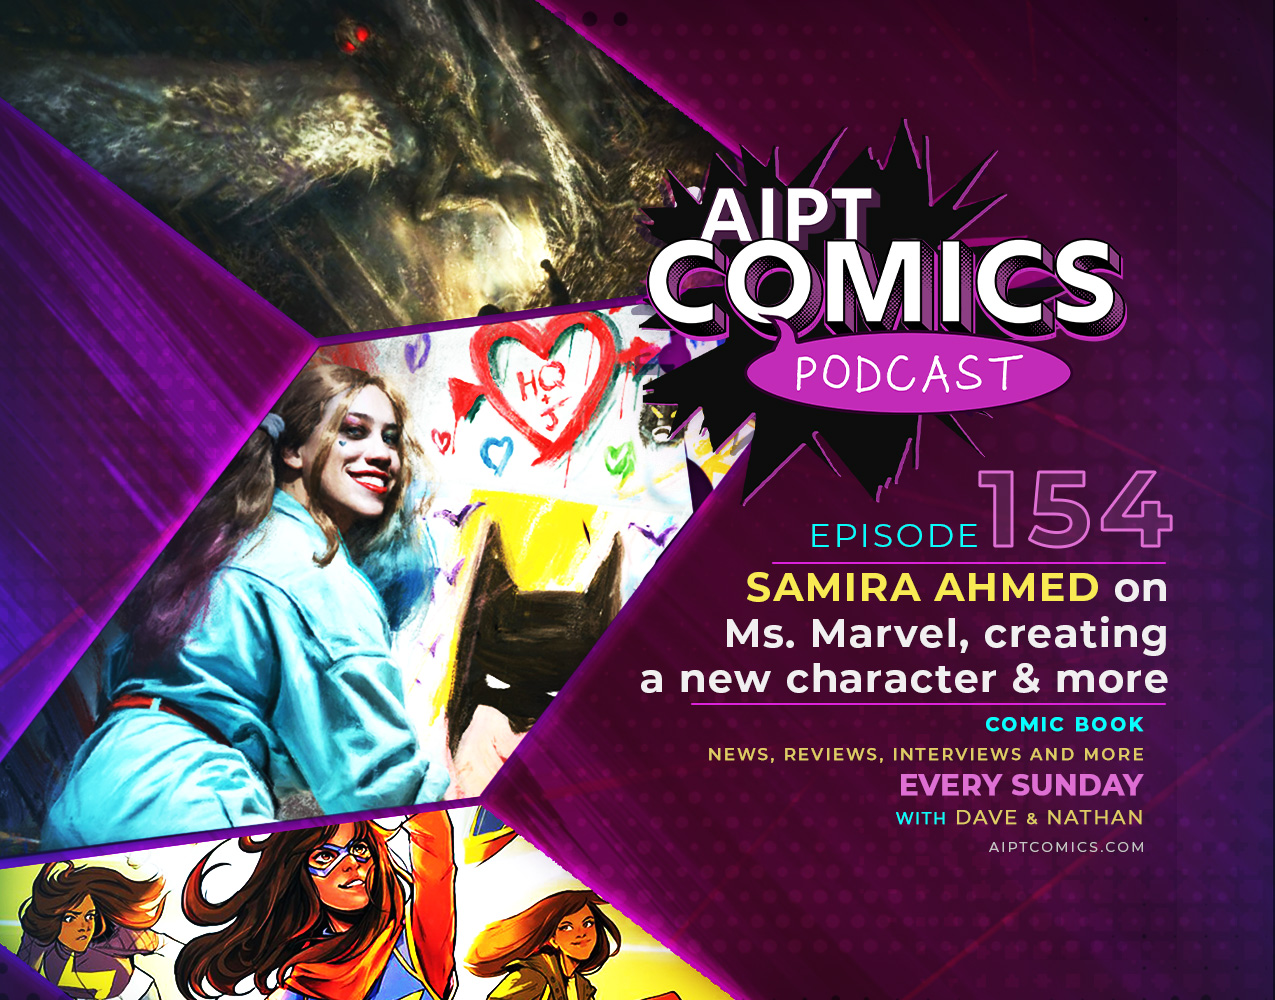 AIPT Comics podcast episode 154: Samira Ahmed on Ms. Marvel, creating a new character, & more